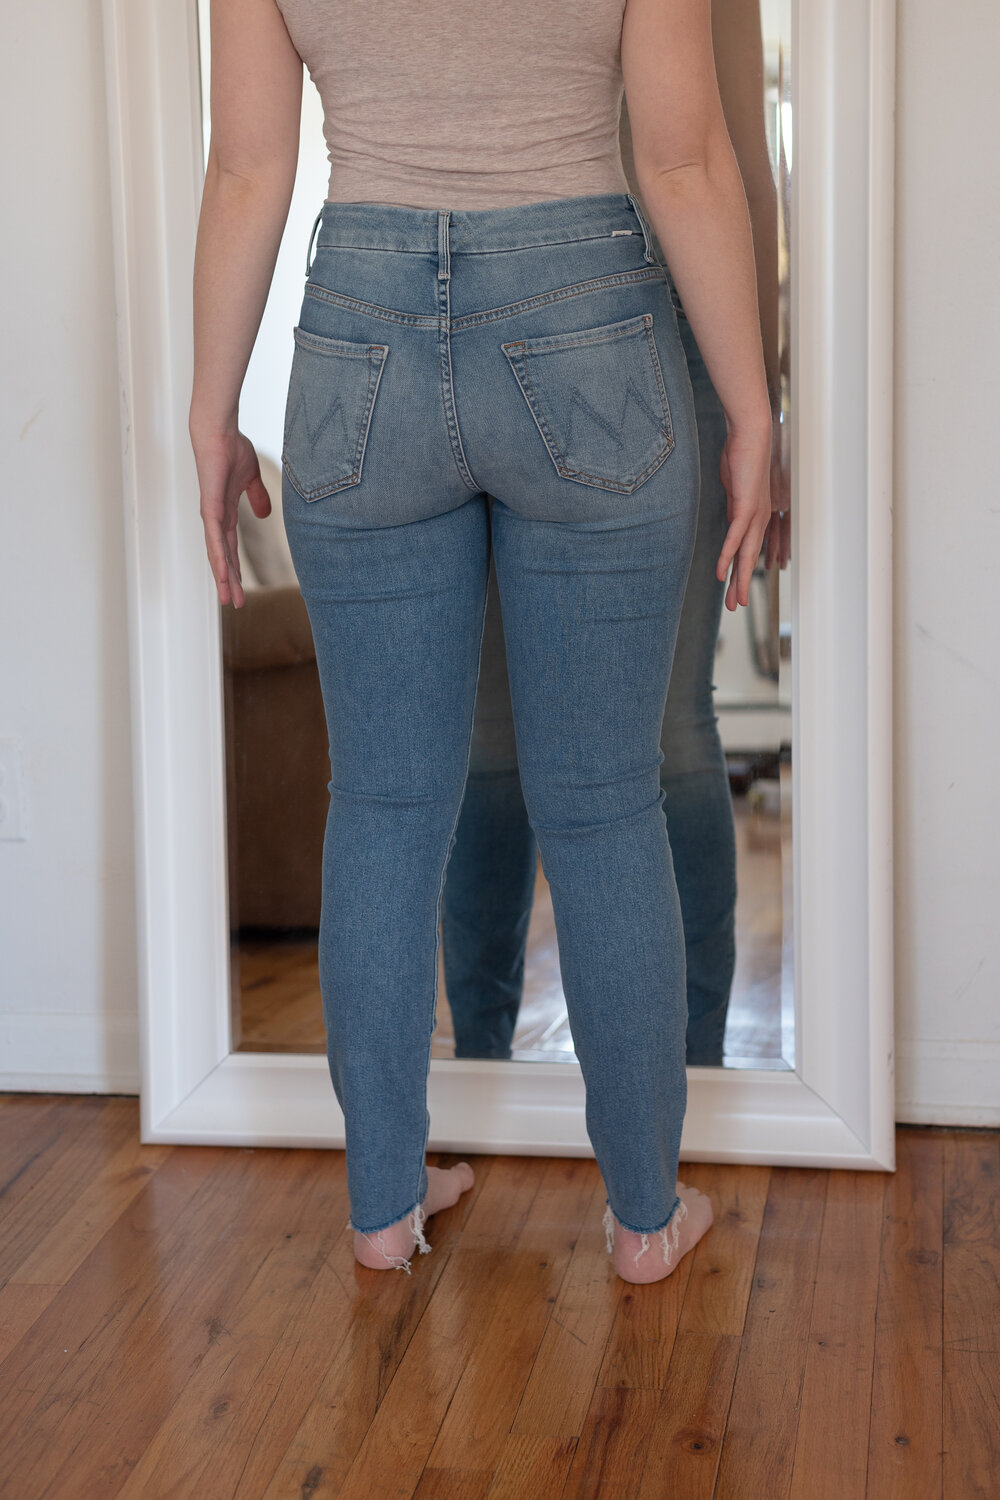 ARE DENIM BRANDS CURVE-FRIENDLY? — The Petite Pear Project